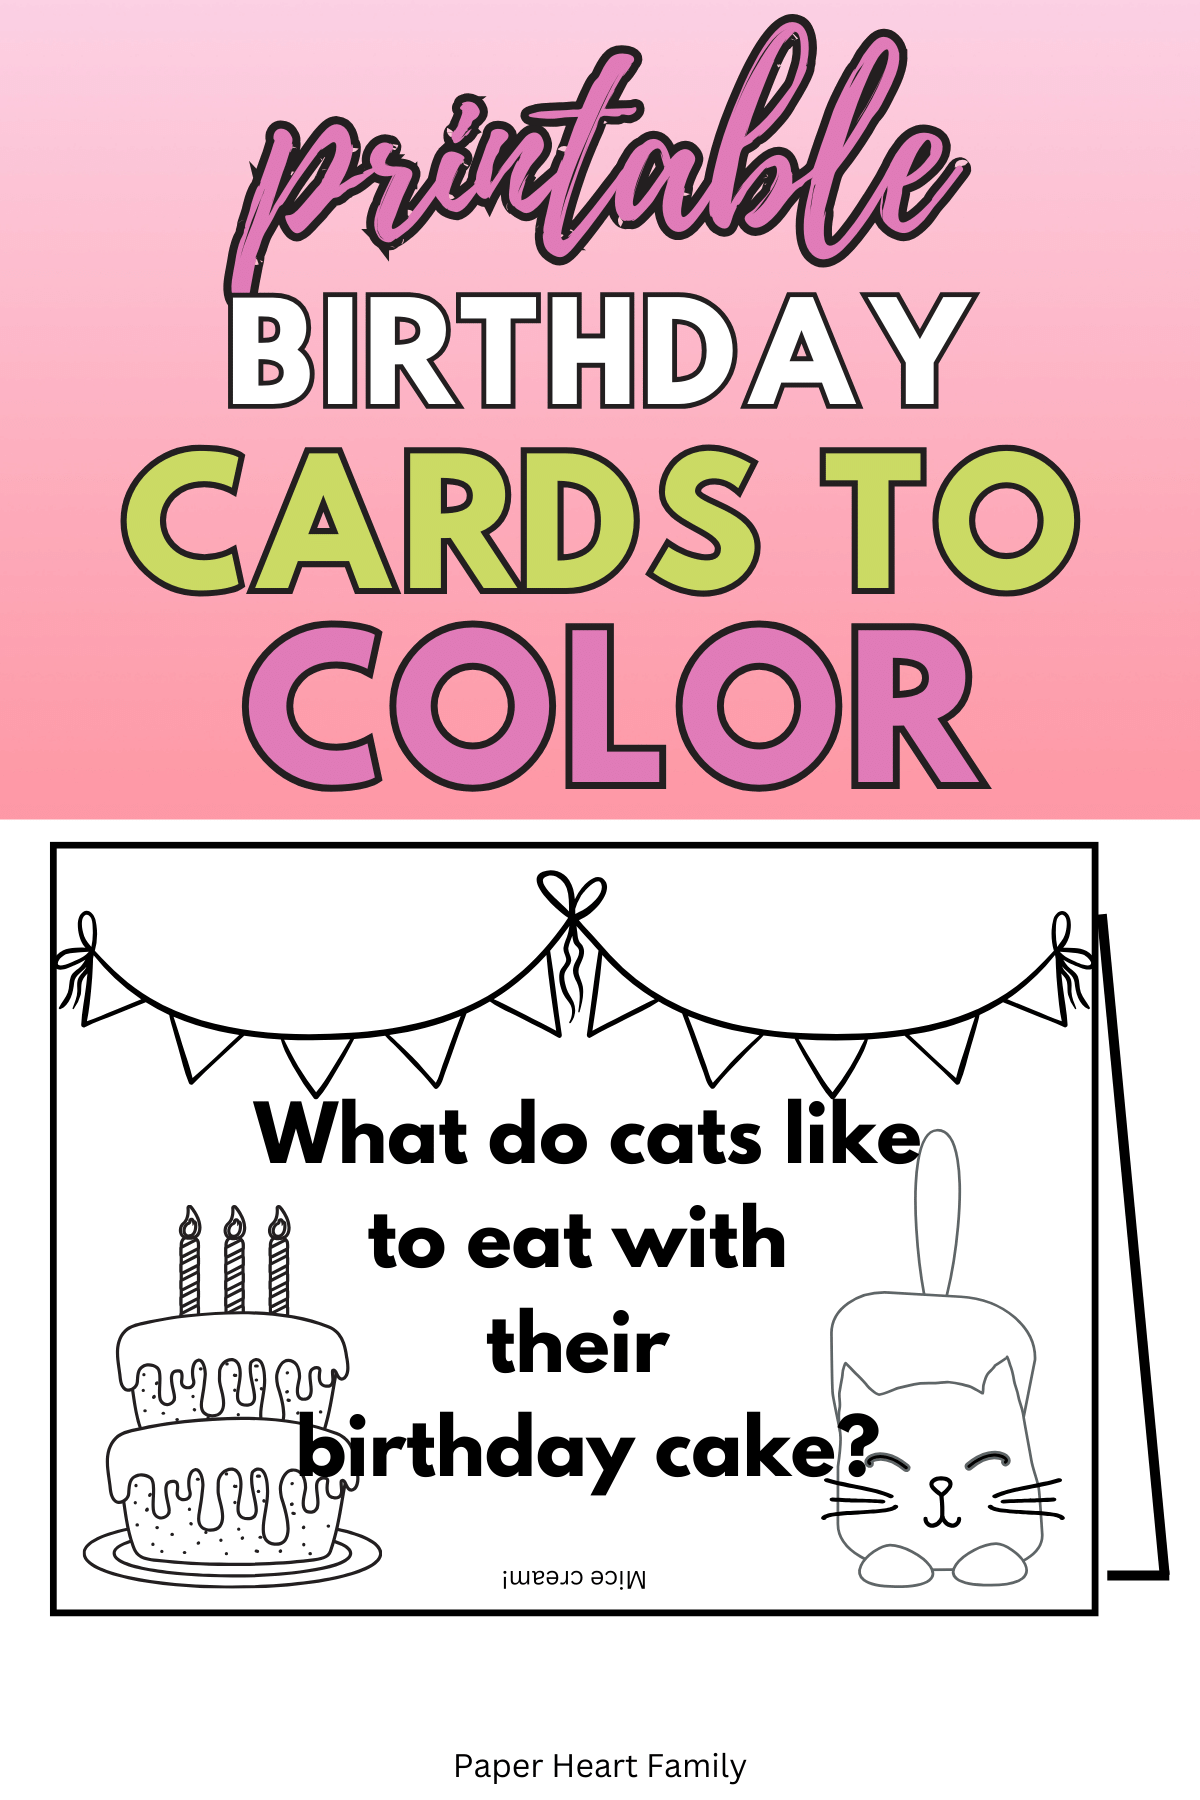 Birthday joke card with the joke: What do cats eat with their birthday cake? Answer: Mice cream!"